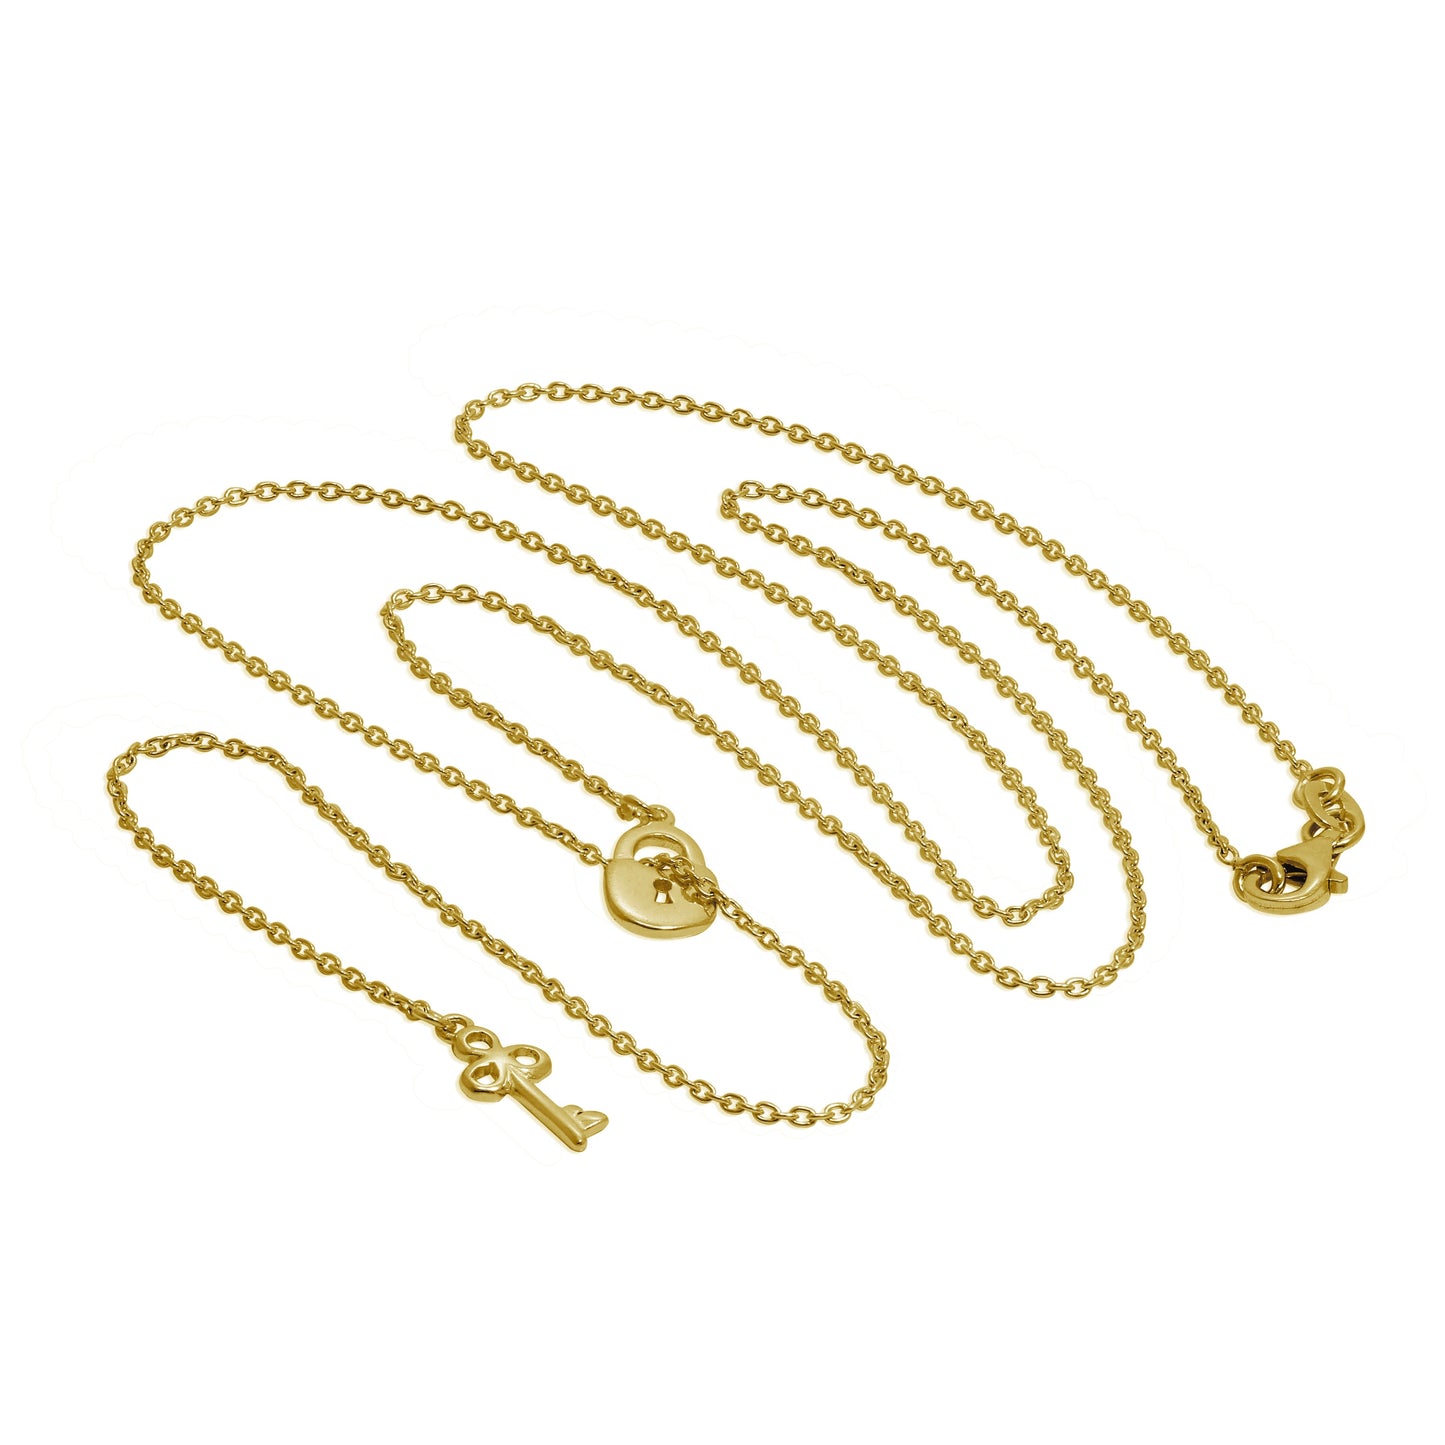 Gold Plated Sterling Silver Key Padlock Drop Necklace